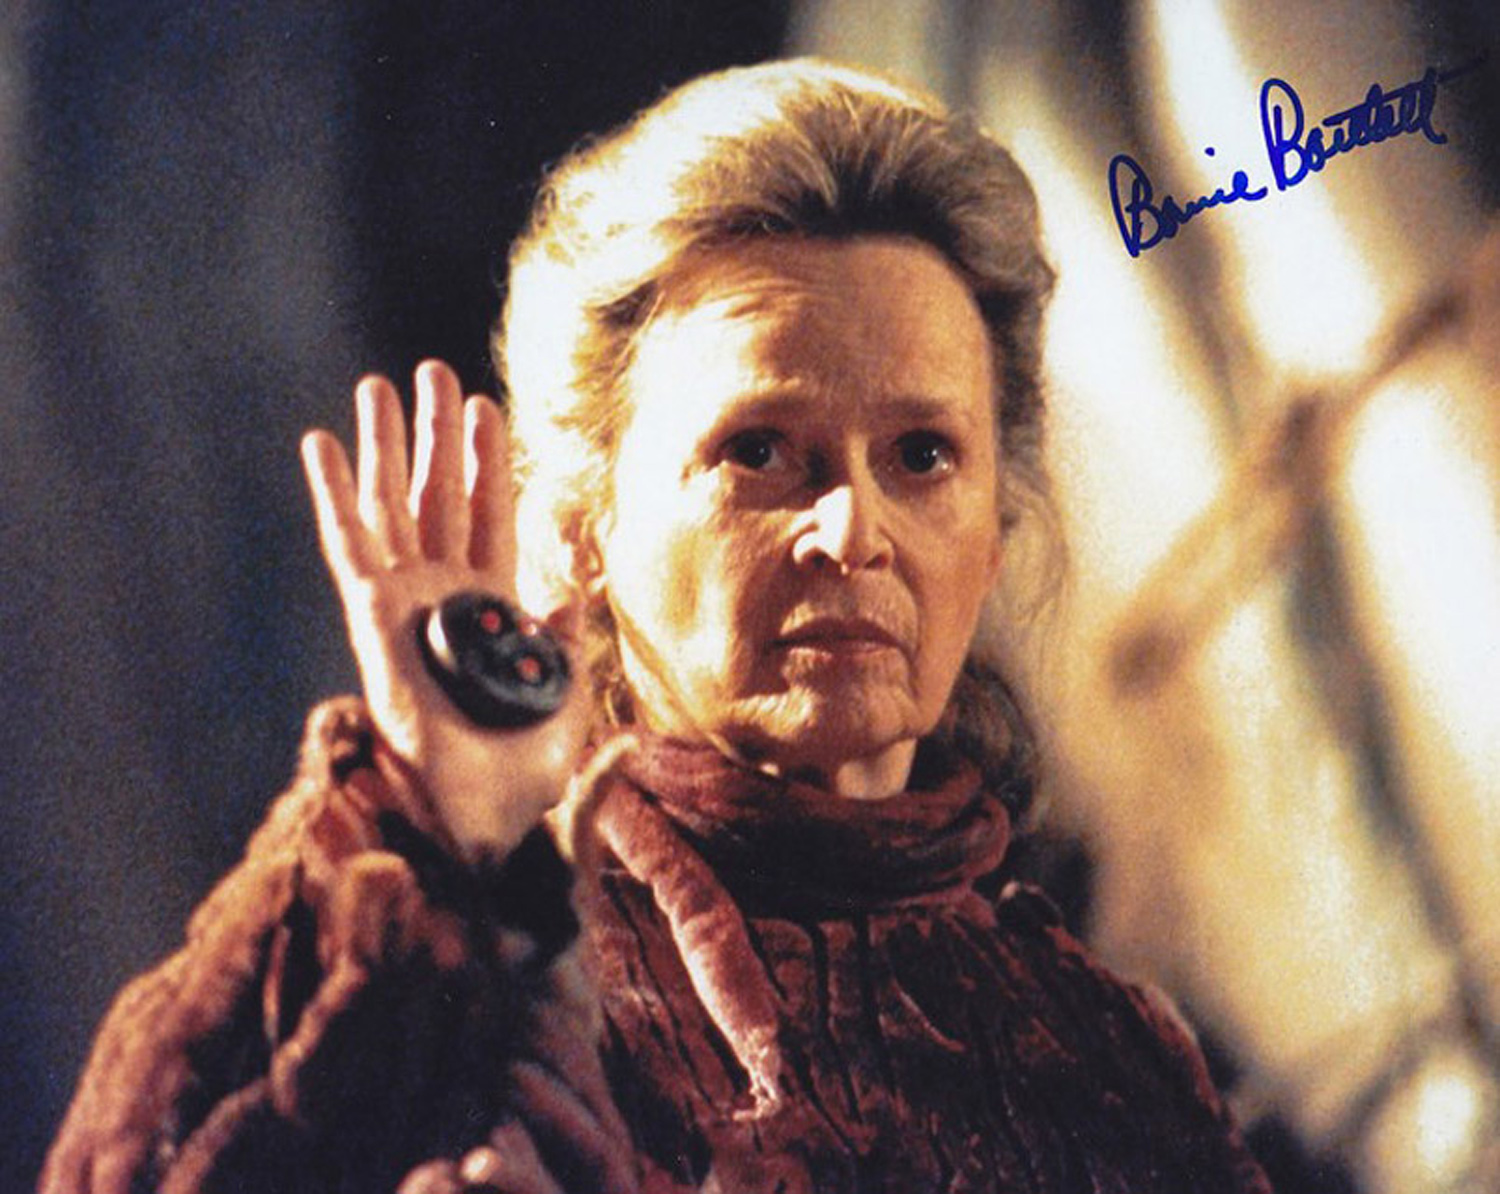 Super Sale! Firefly / Serenity Bonnie Bartlett hand signed 10x8 photo. This beautiful 10x8 hand